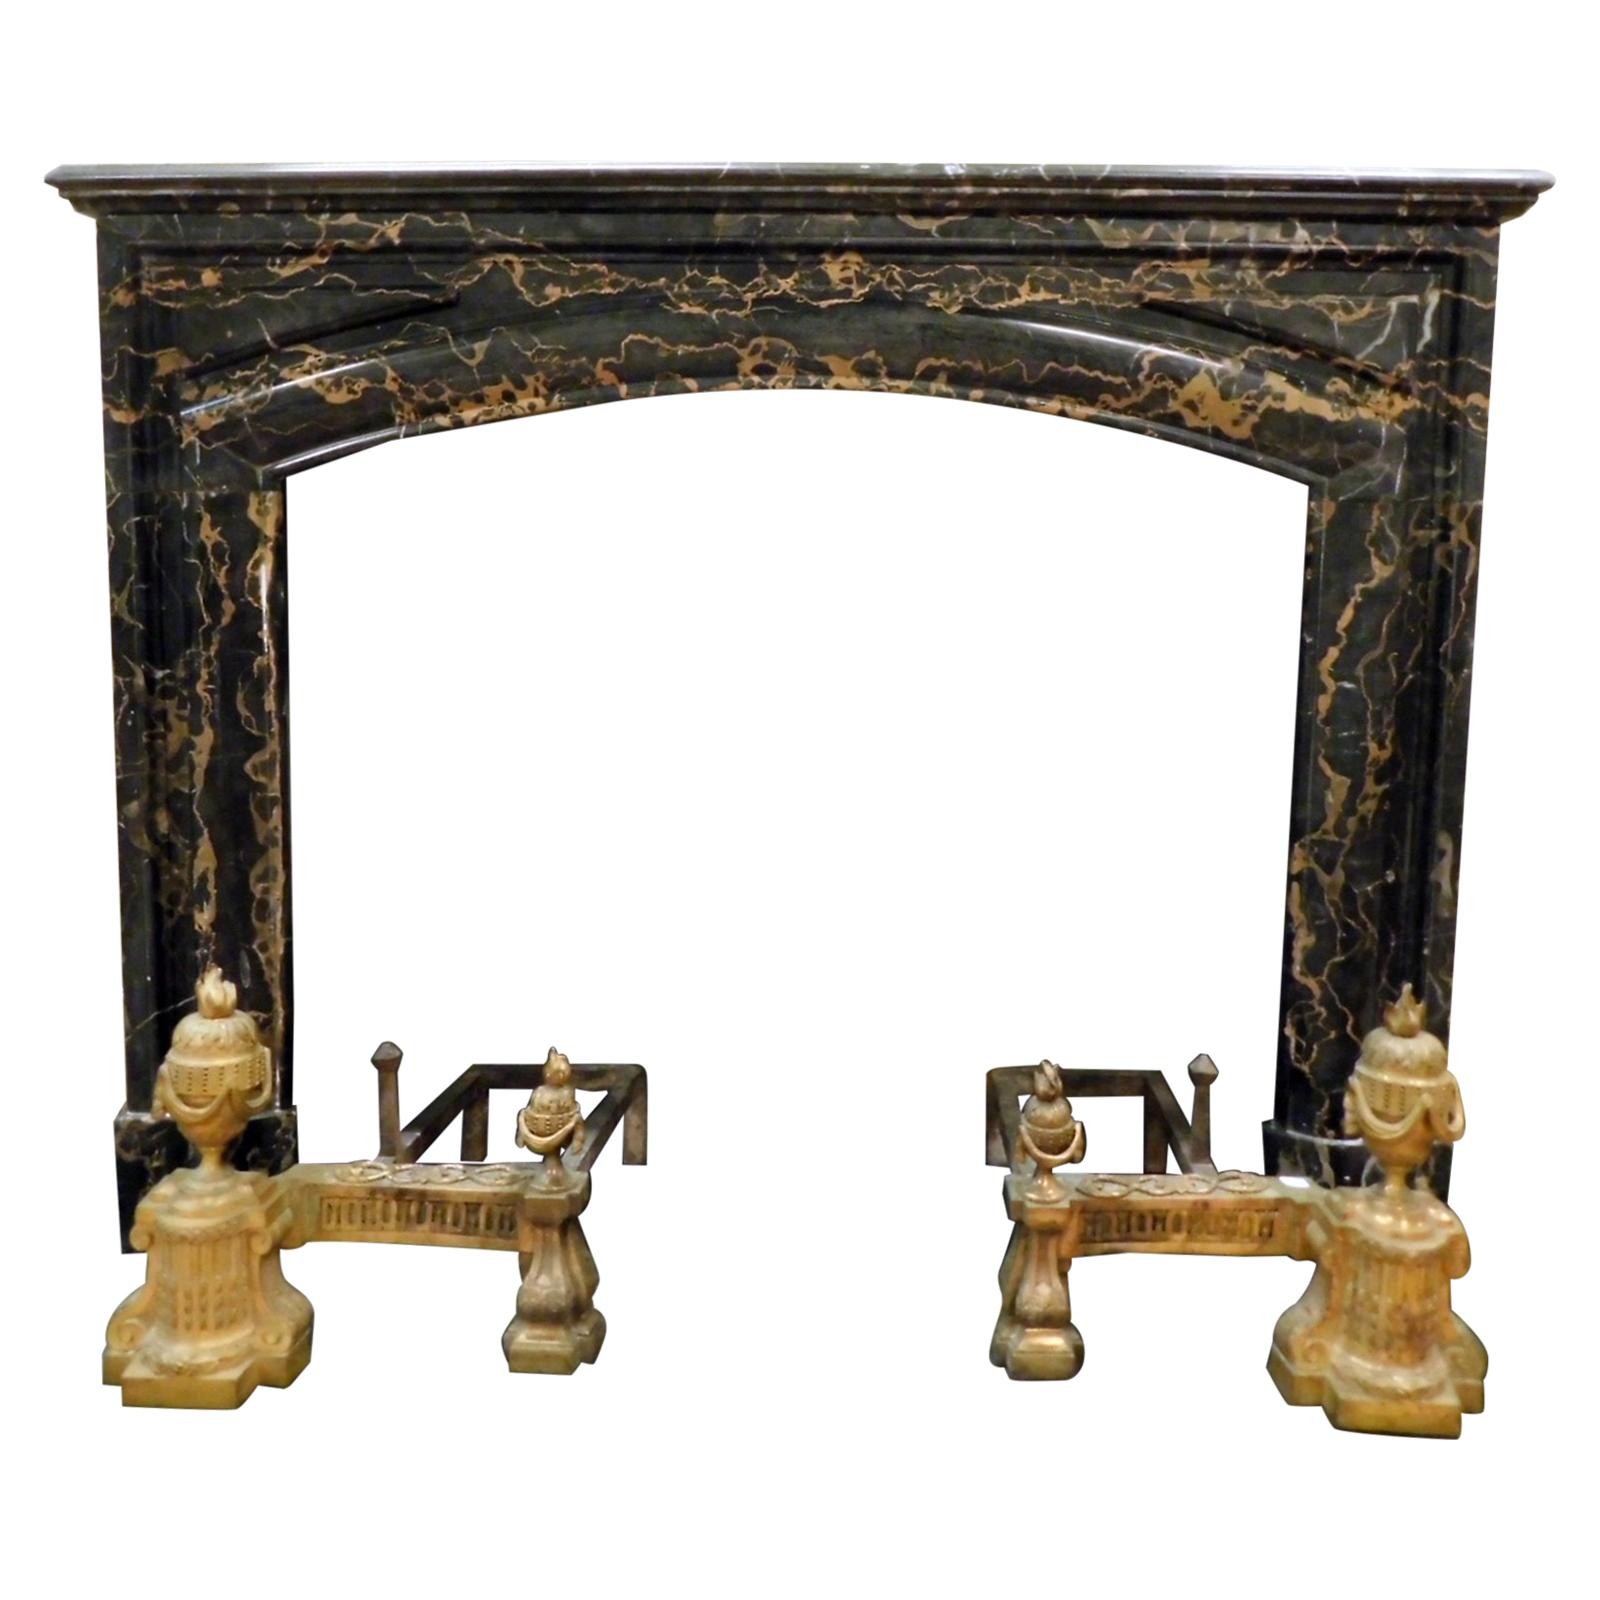 Antique Fireplace Mantle in Black Portoro Veins Marble, 19th Century, France